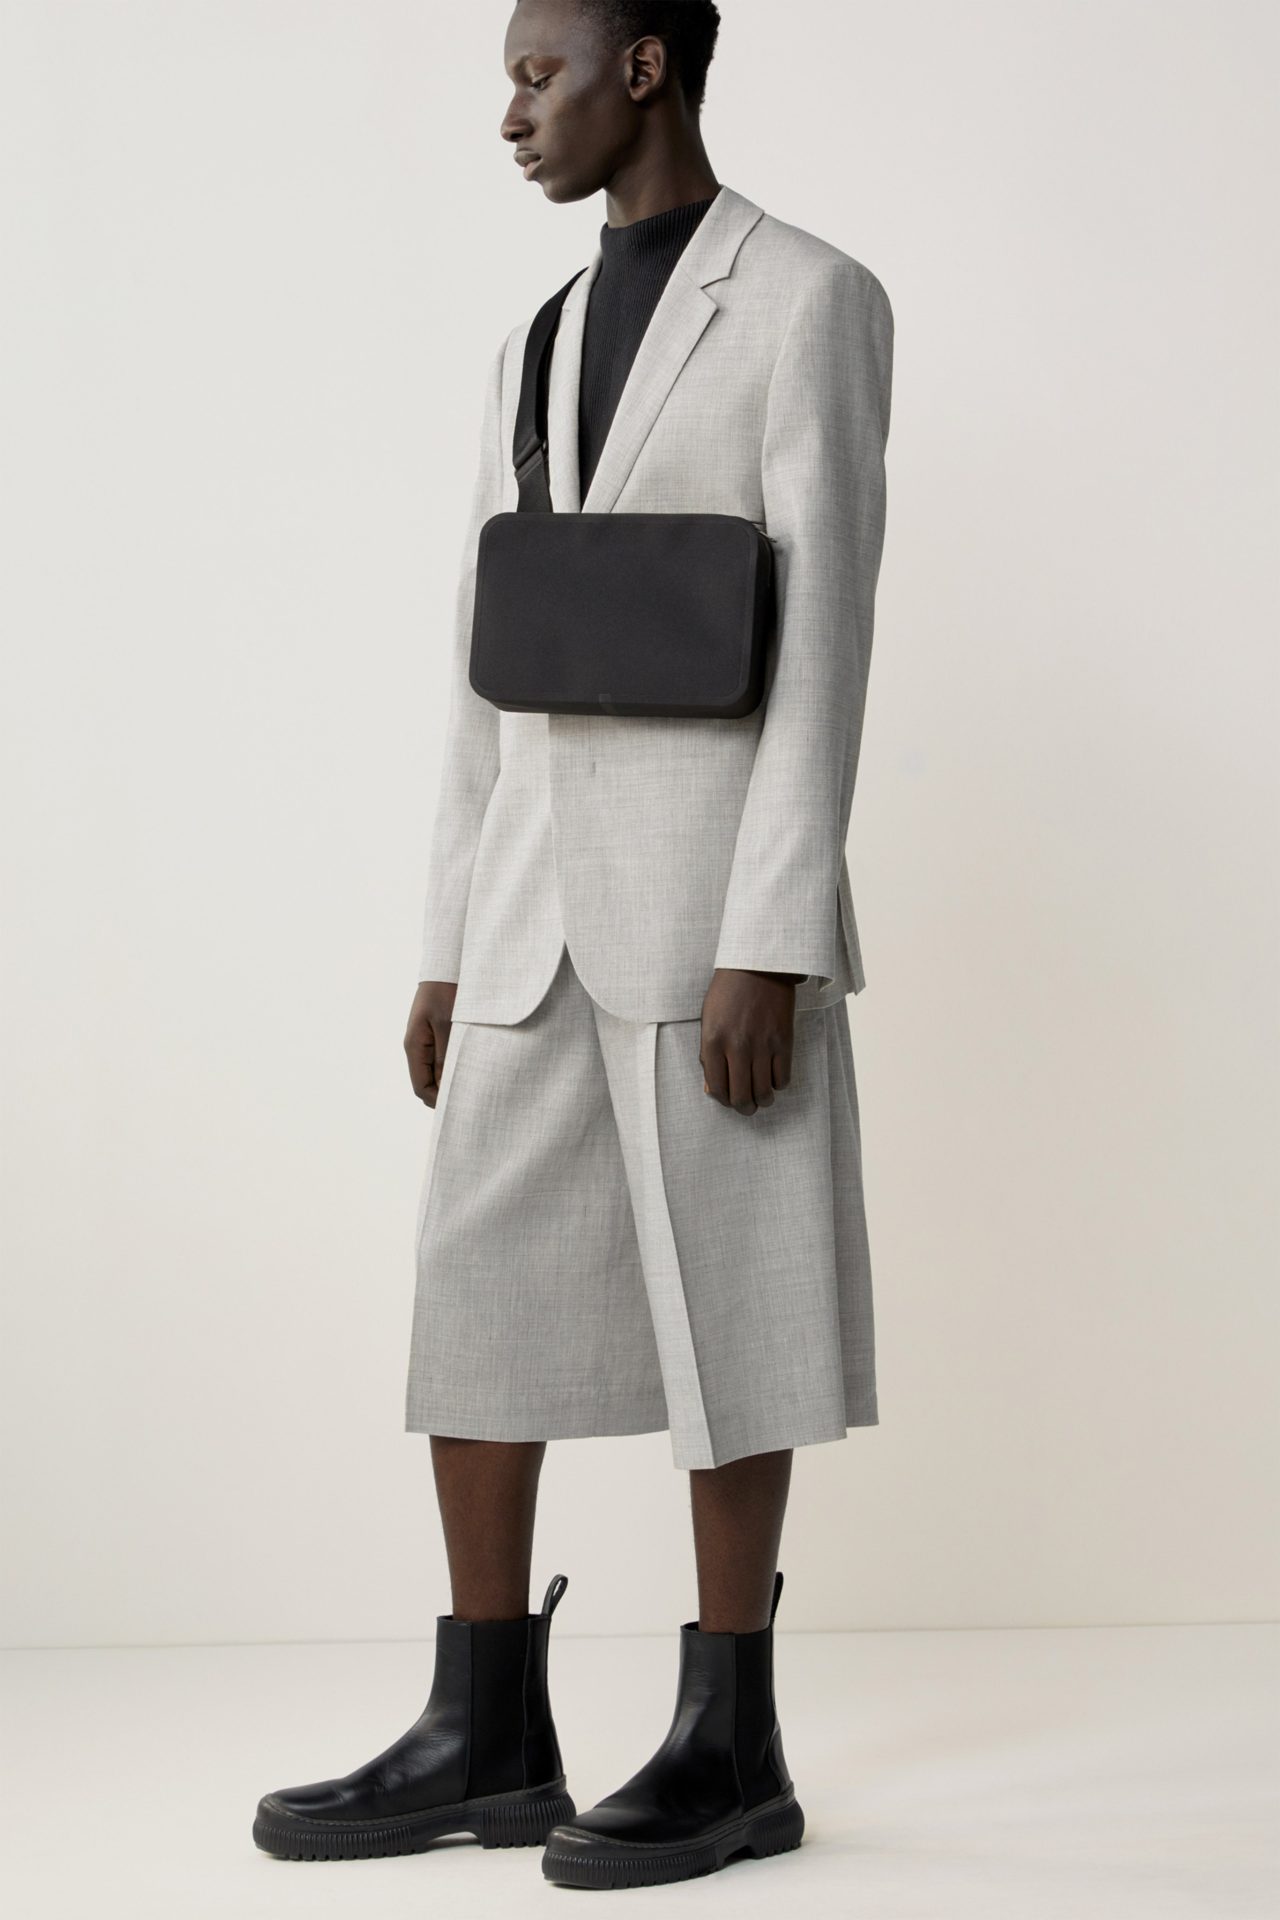 COS Explores Responsibly-Sourced Fabrics for Its Fall Ready-to-Wear ...